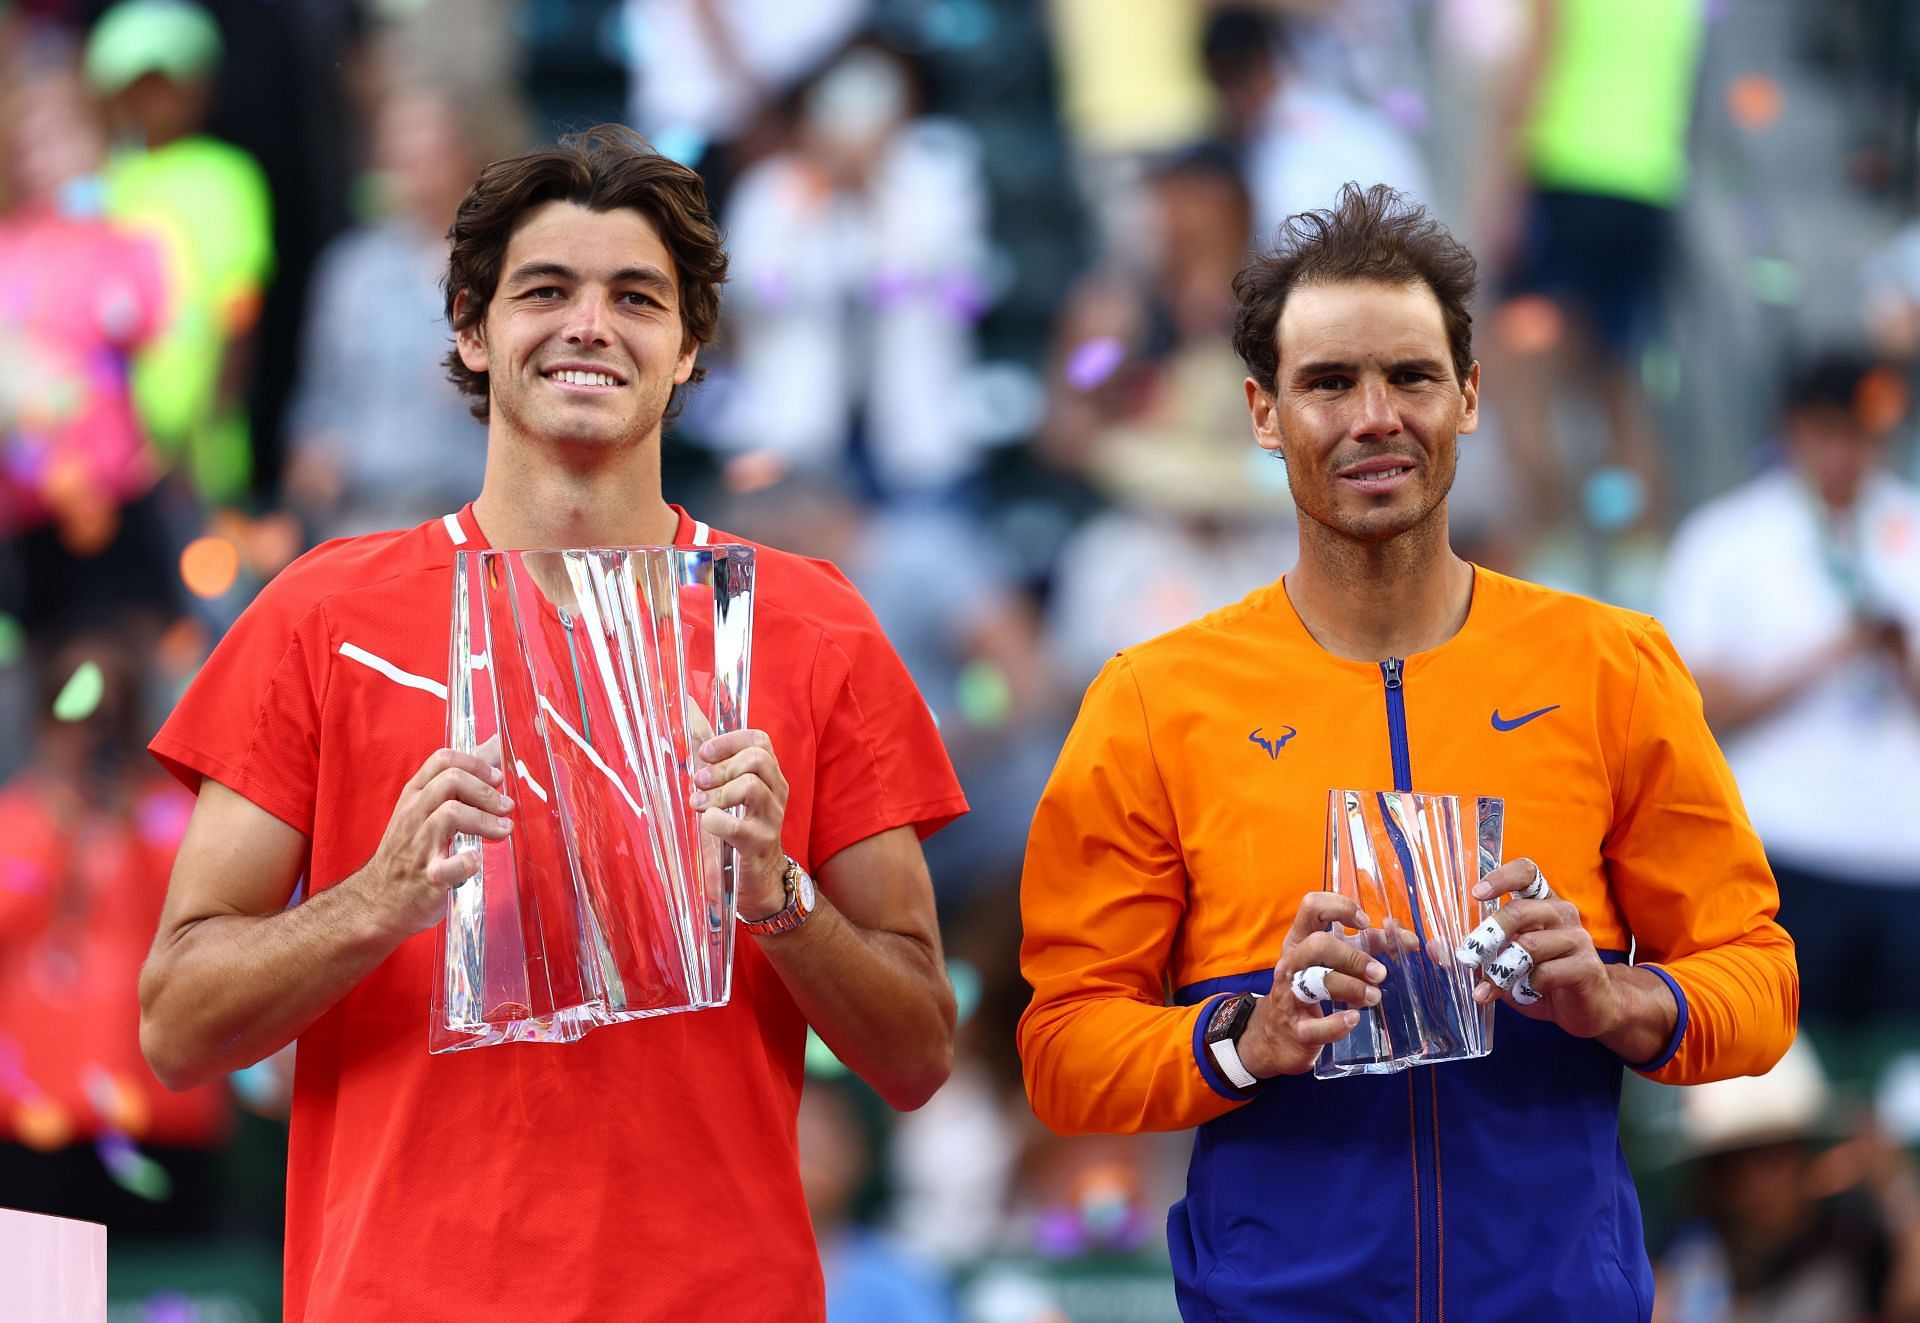 The Spaniard with the runner-up trophy